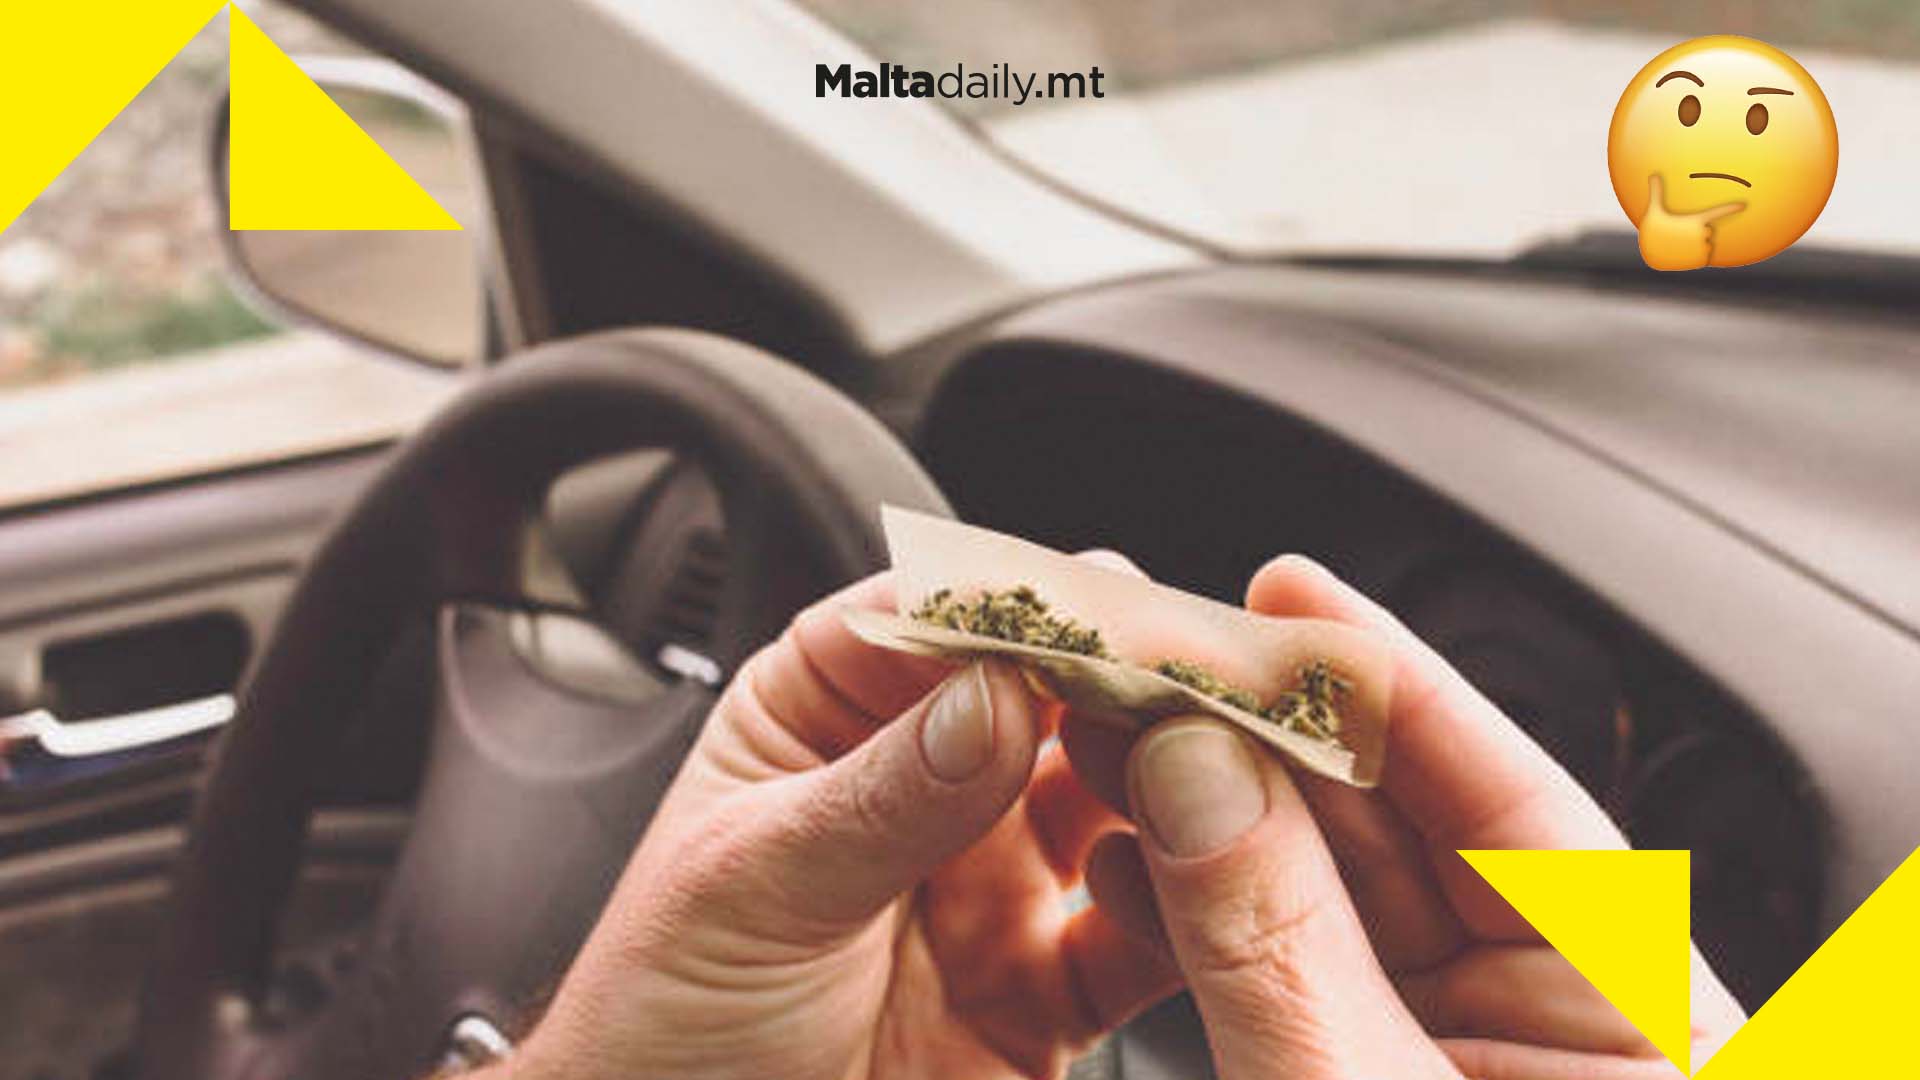 Increase in cannabis access can lead to more car accidents say doctors